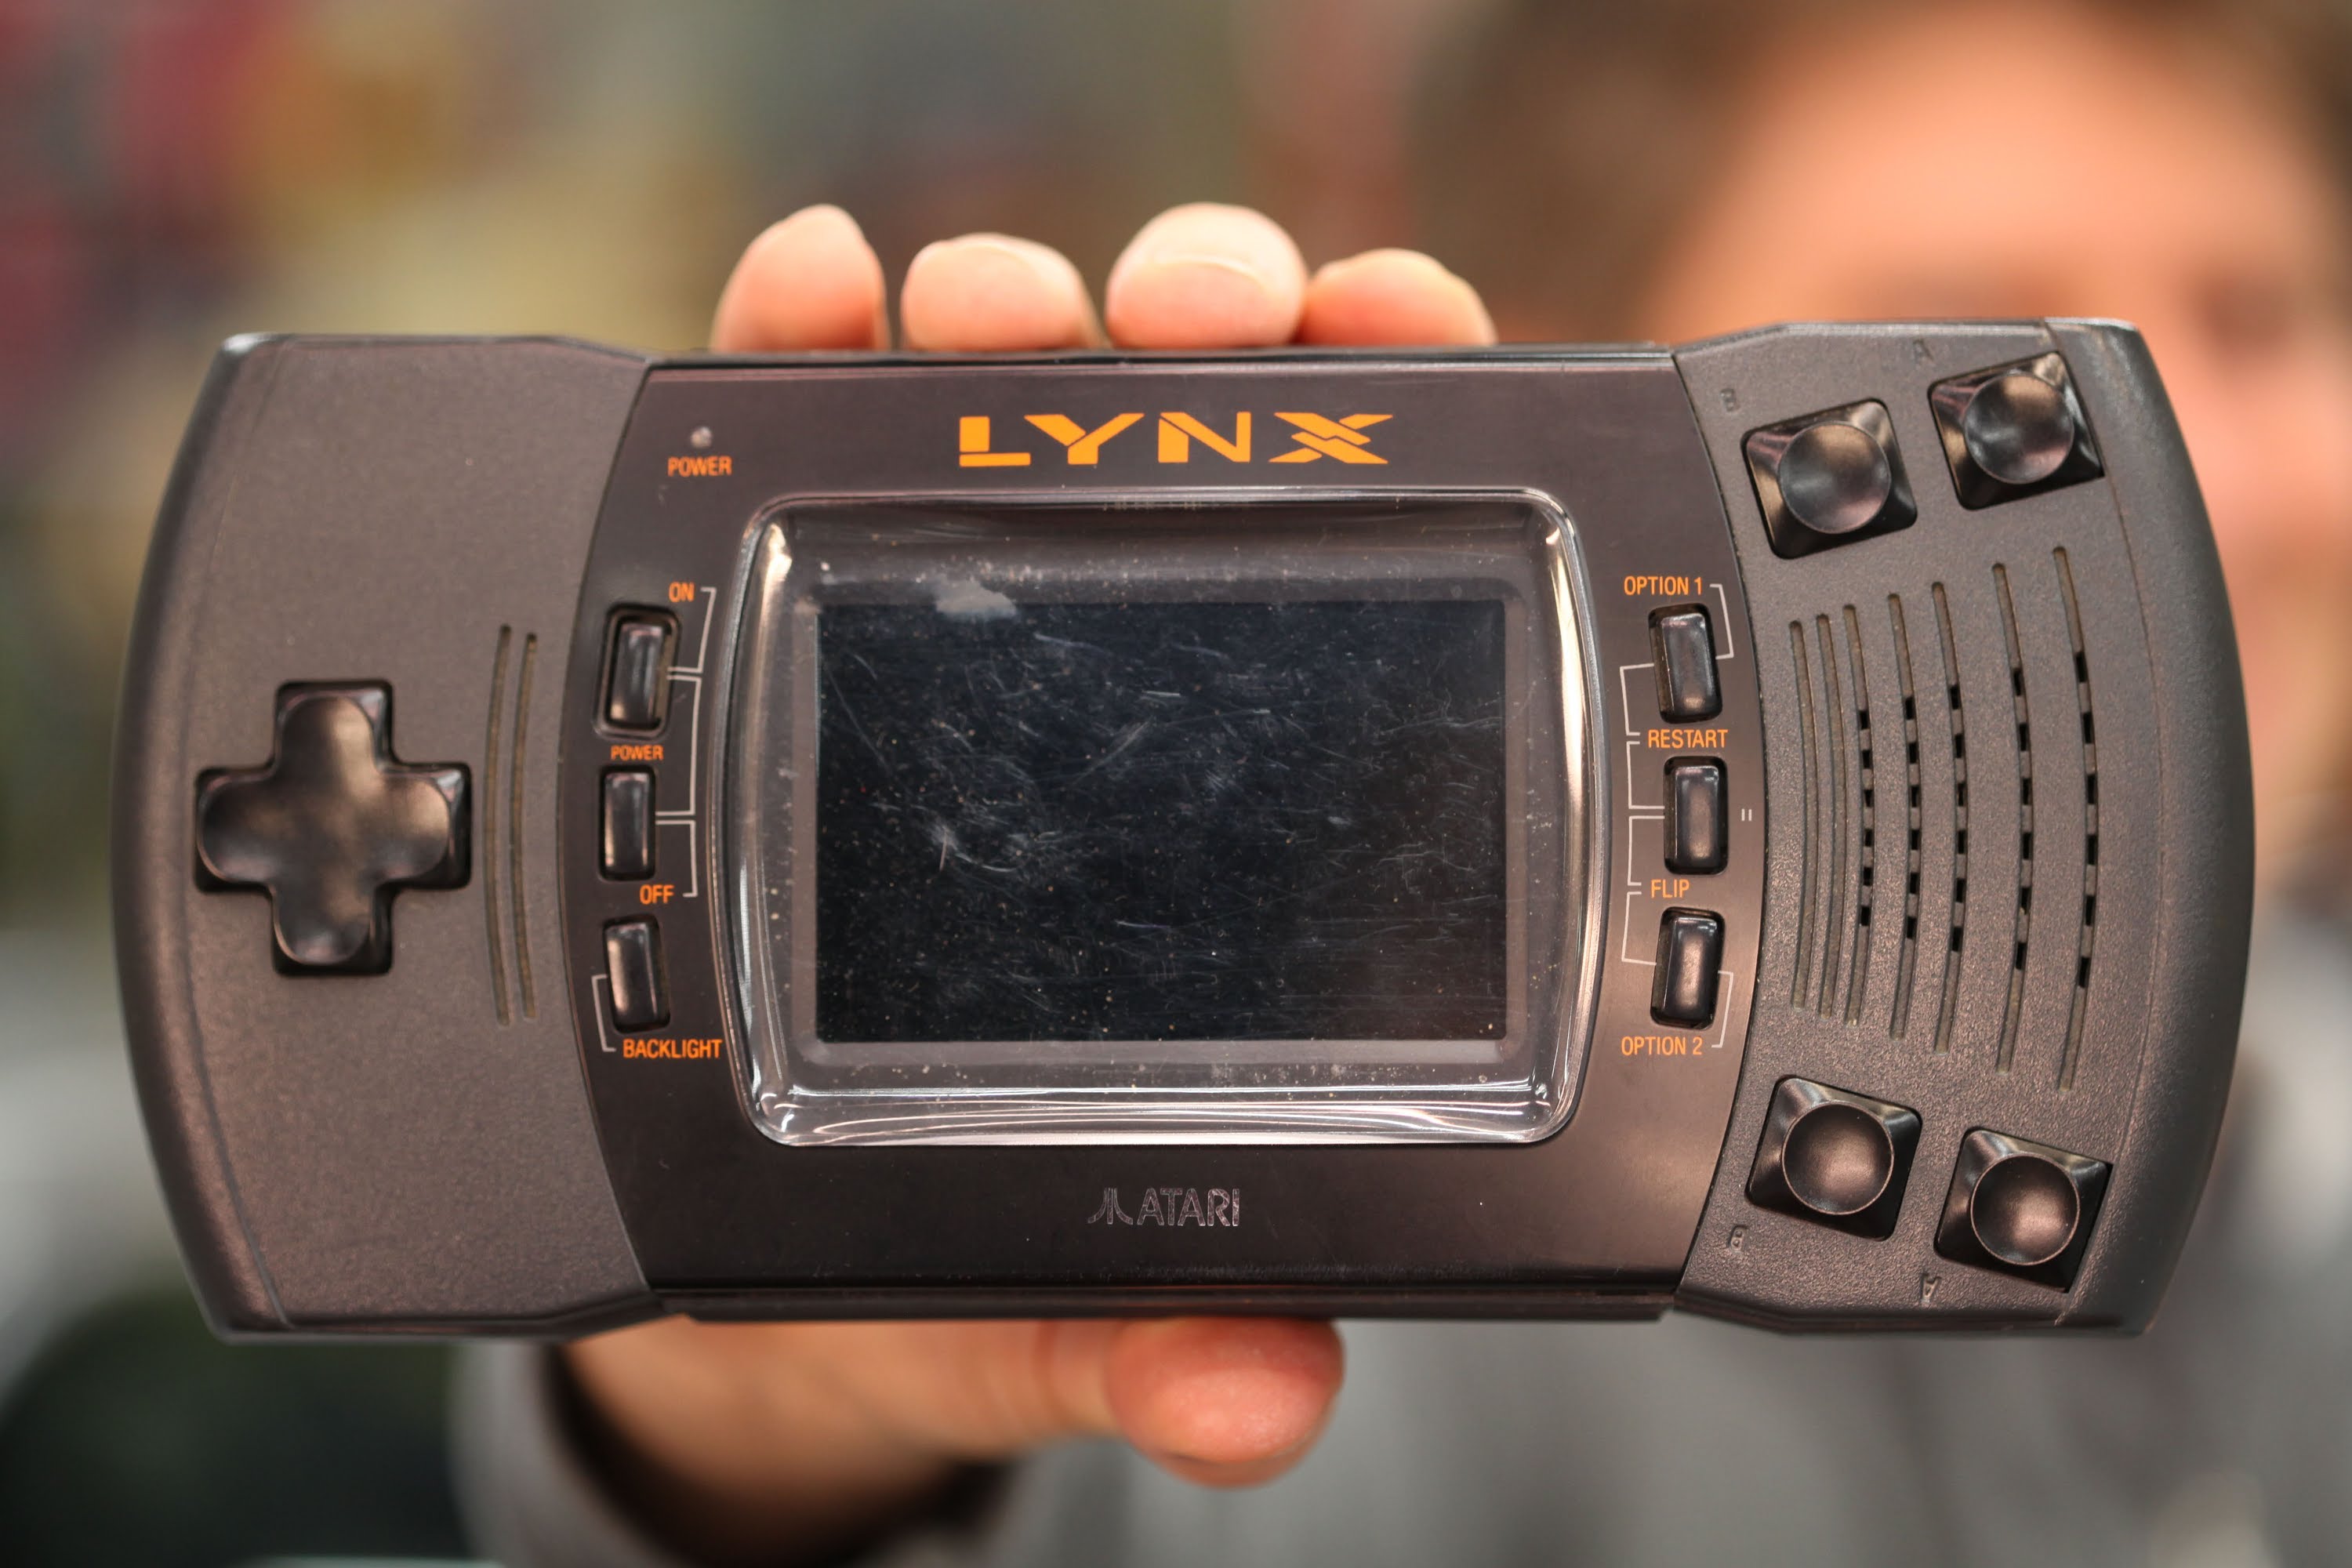 Amazing Atari Lynx Pictures & Backgrounds